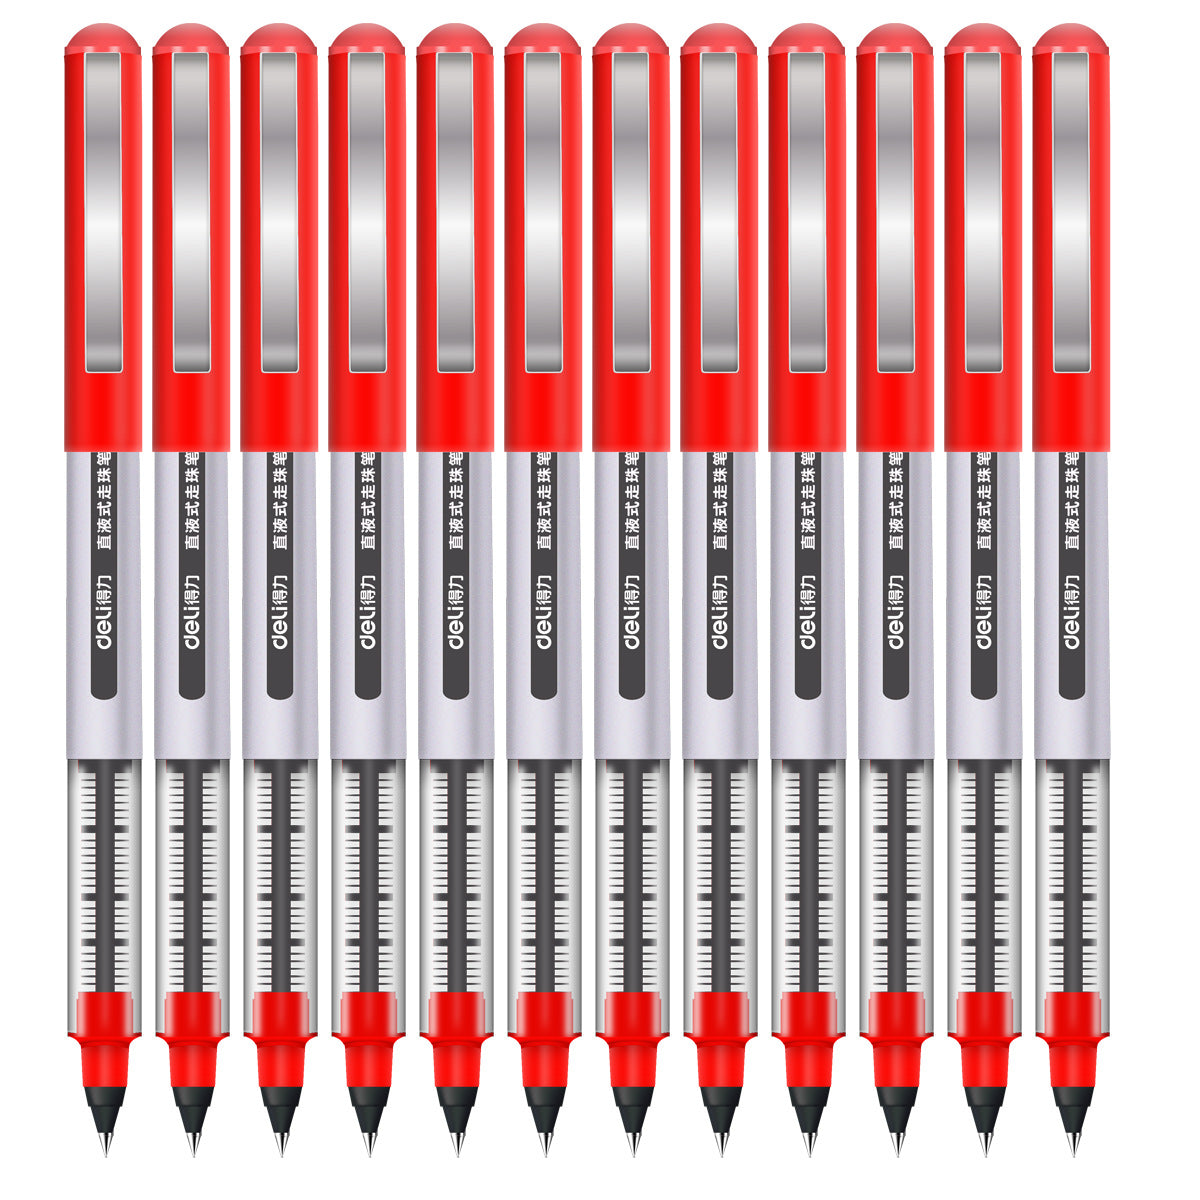 DELI S656 Rollerball Pens 12 Pack Black Red Blue Liquid Ink 0.5mm Fine Point